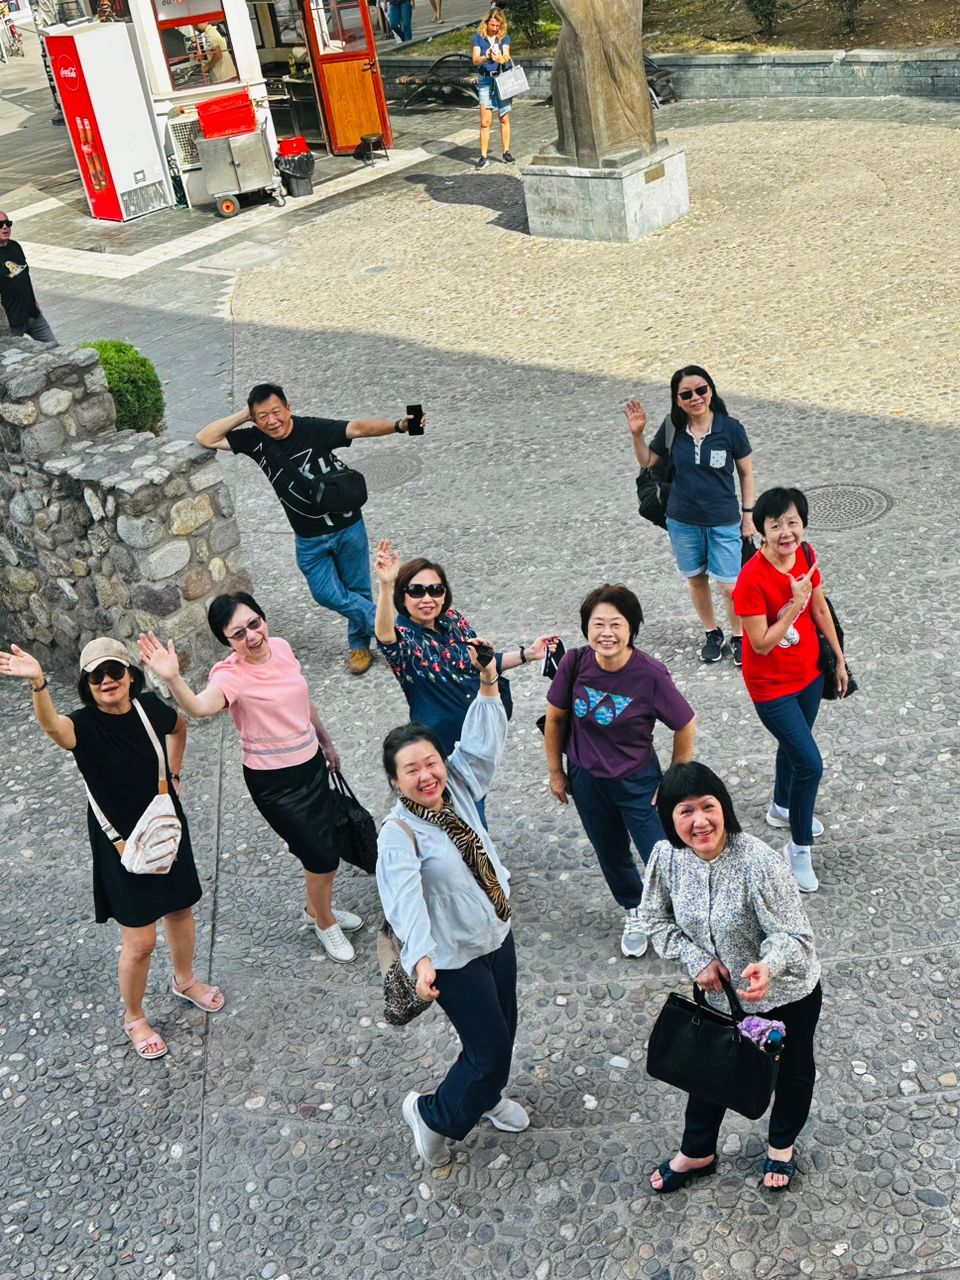 Tourists from Malaysia visiting the European continent